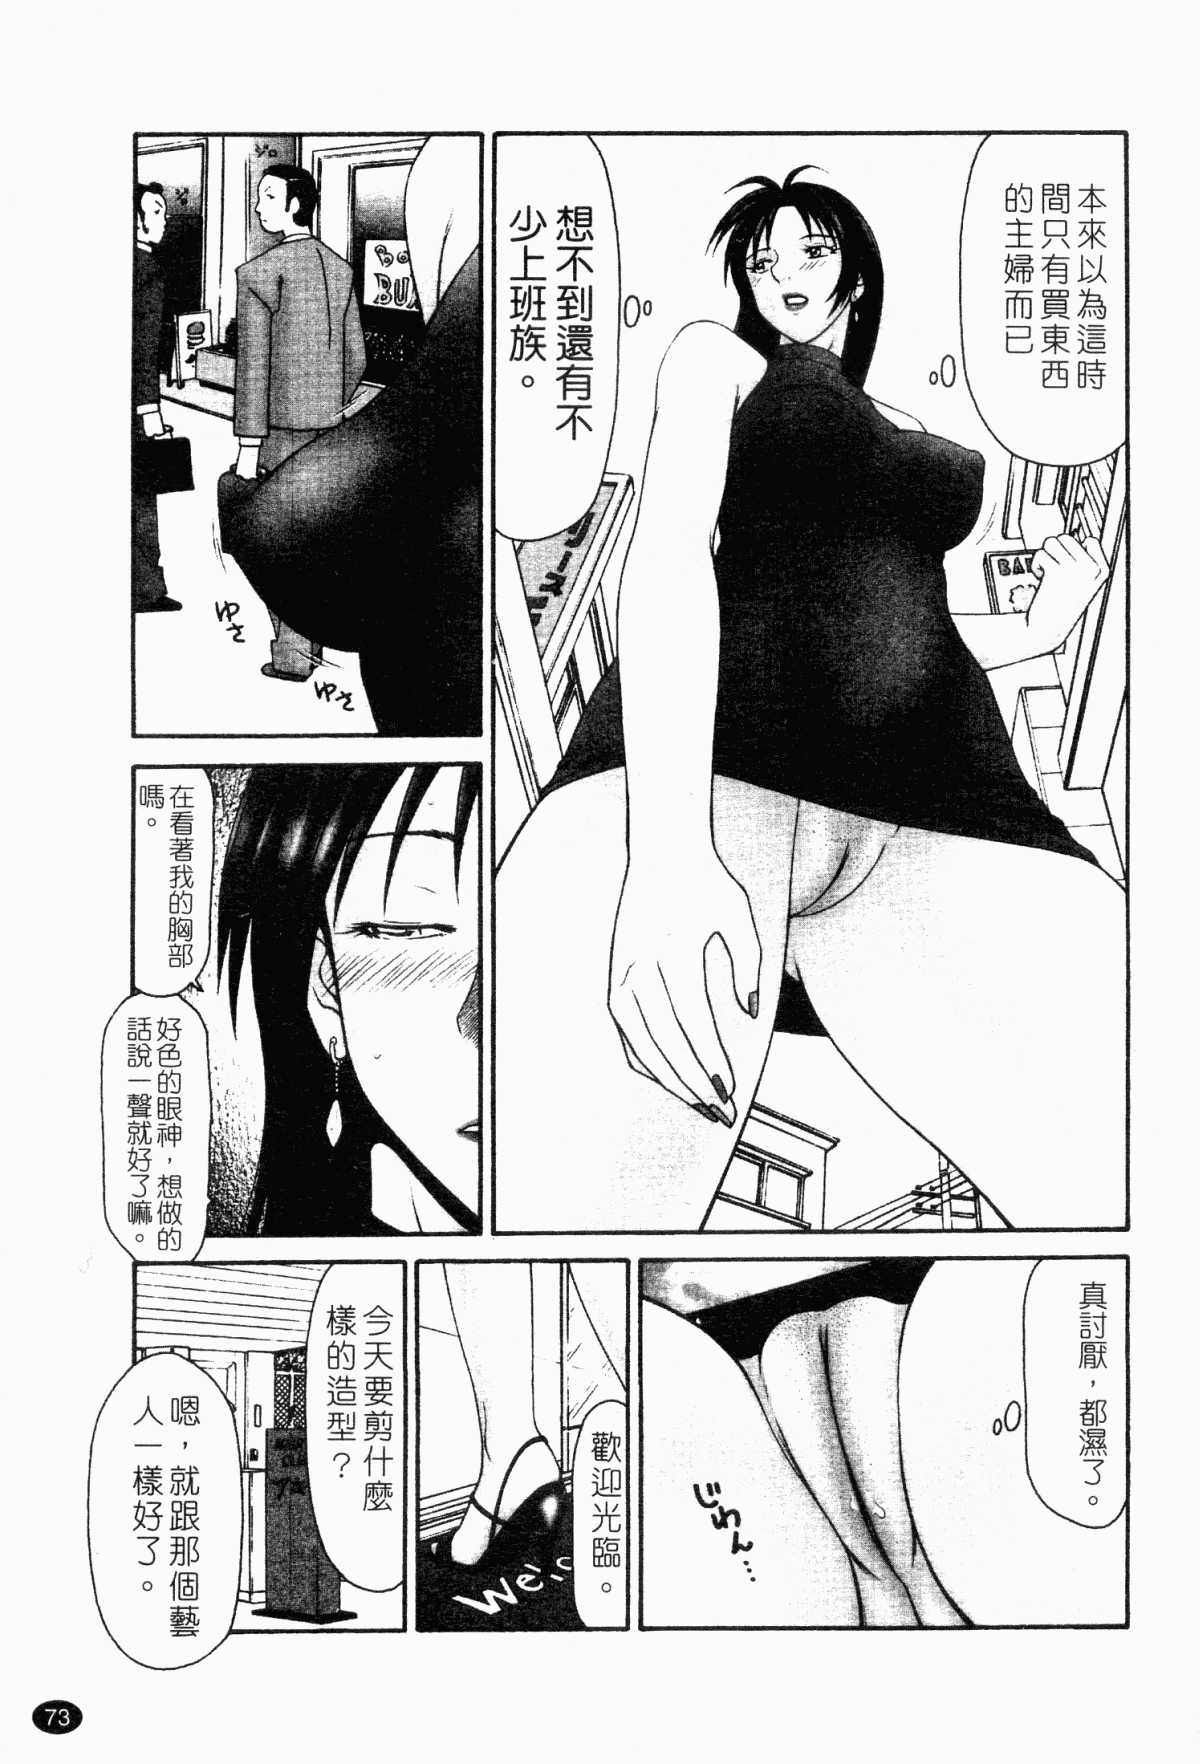 [Ippei Koma] The heisei field day of wives[Chinese translated] 